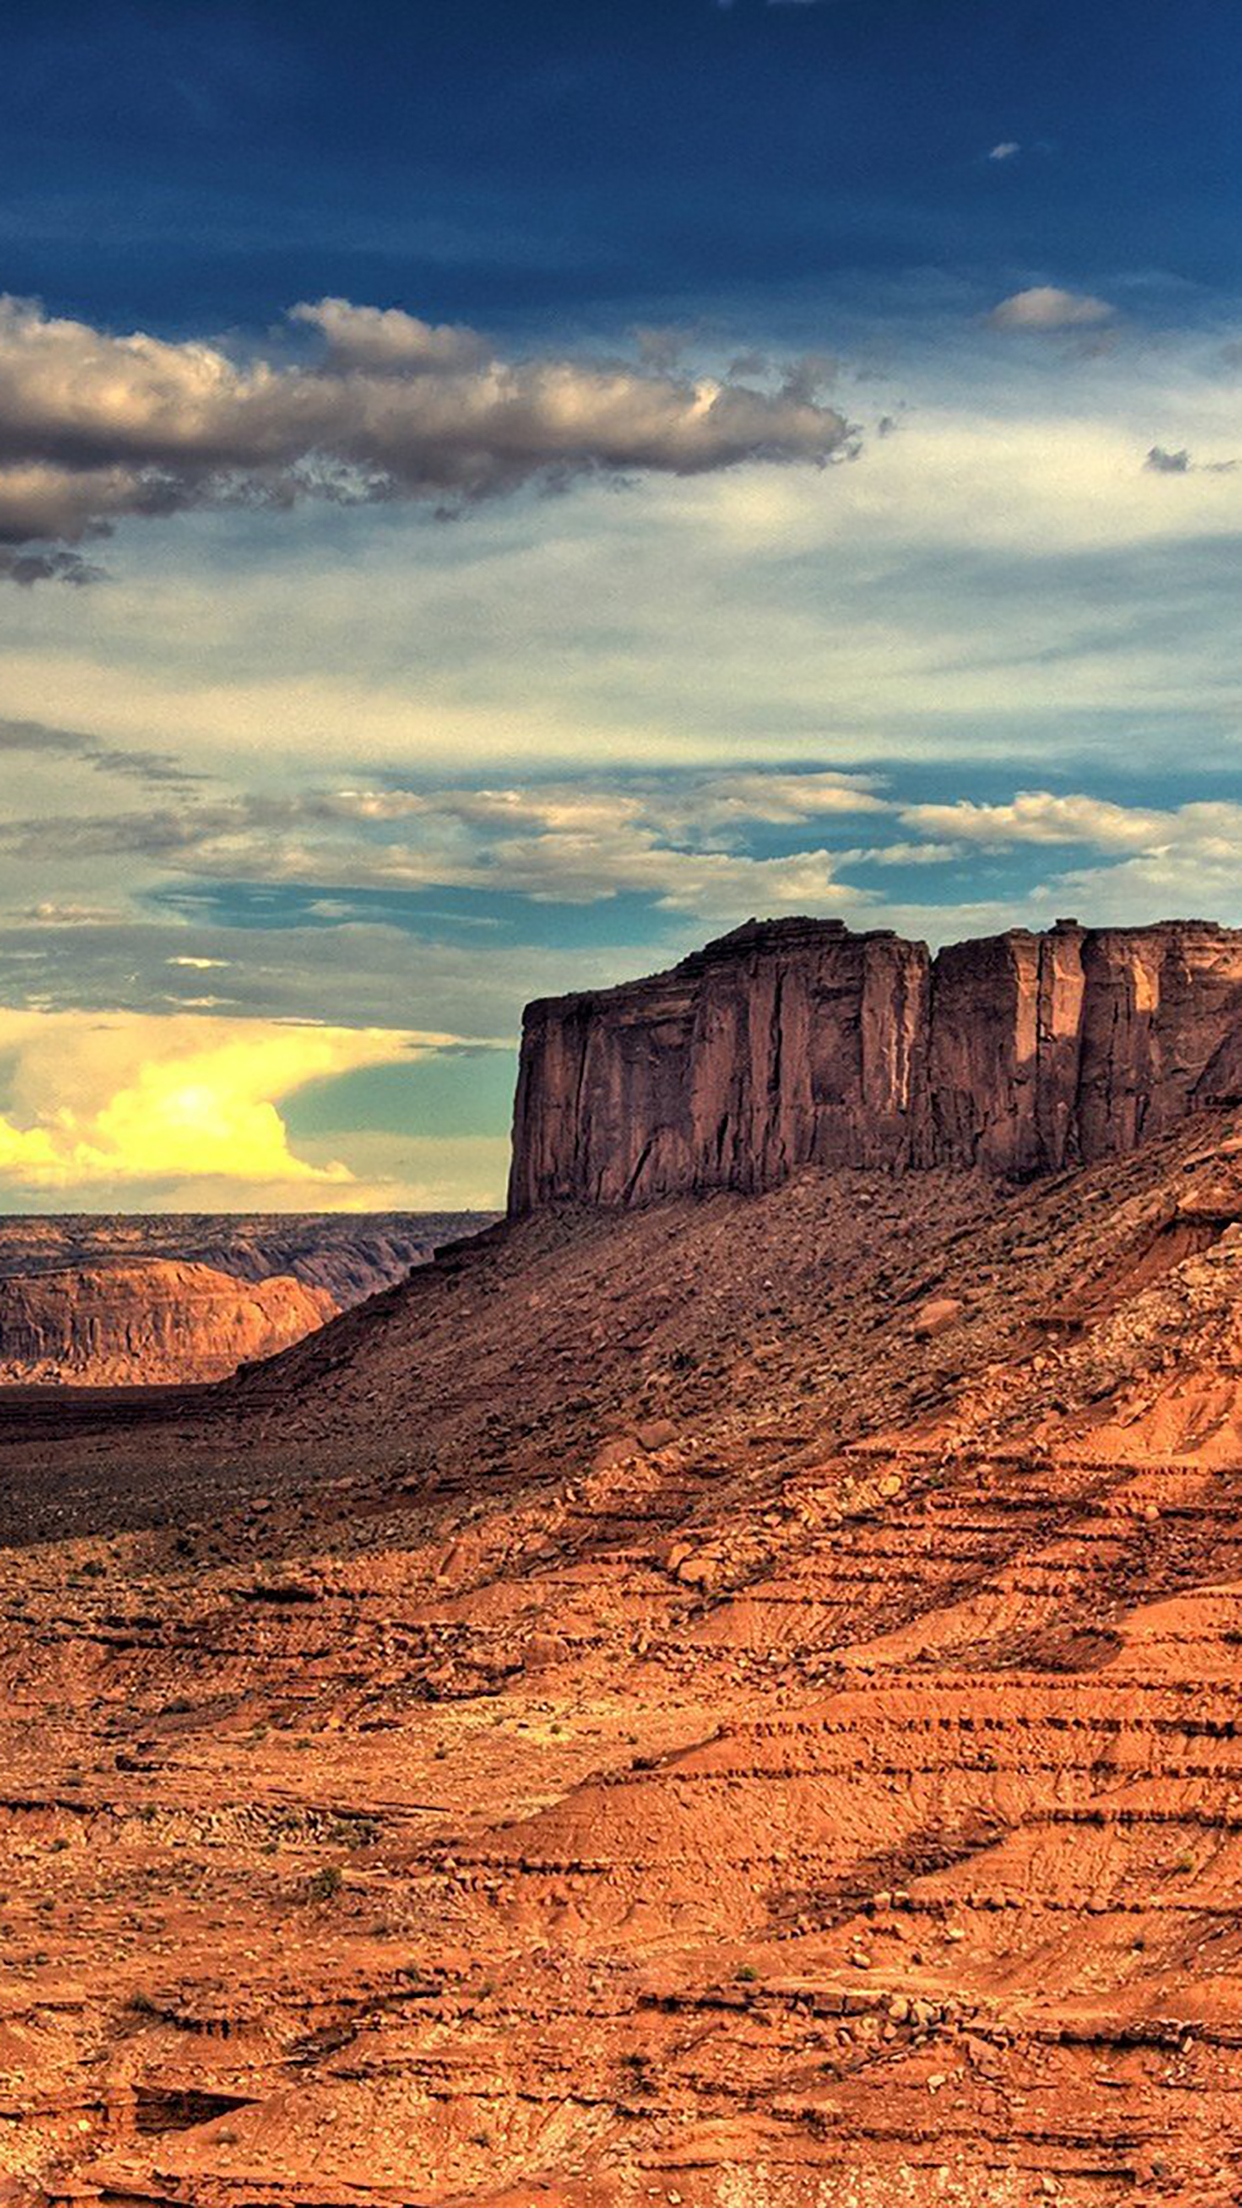 Landscapes Canyon Wallpaper for iPhone Pro Max, X, 6